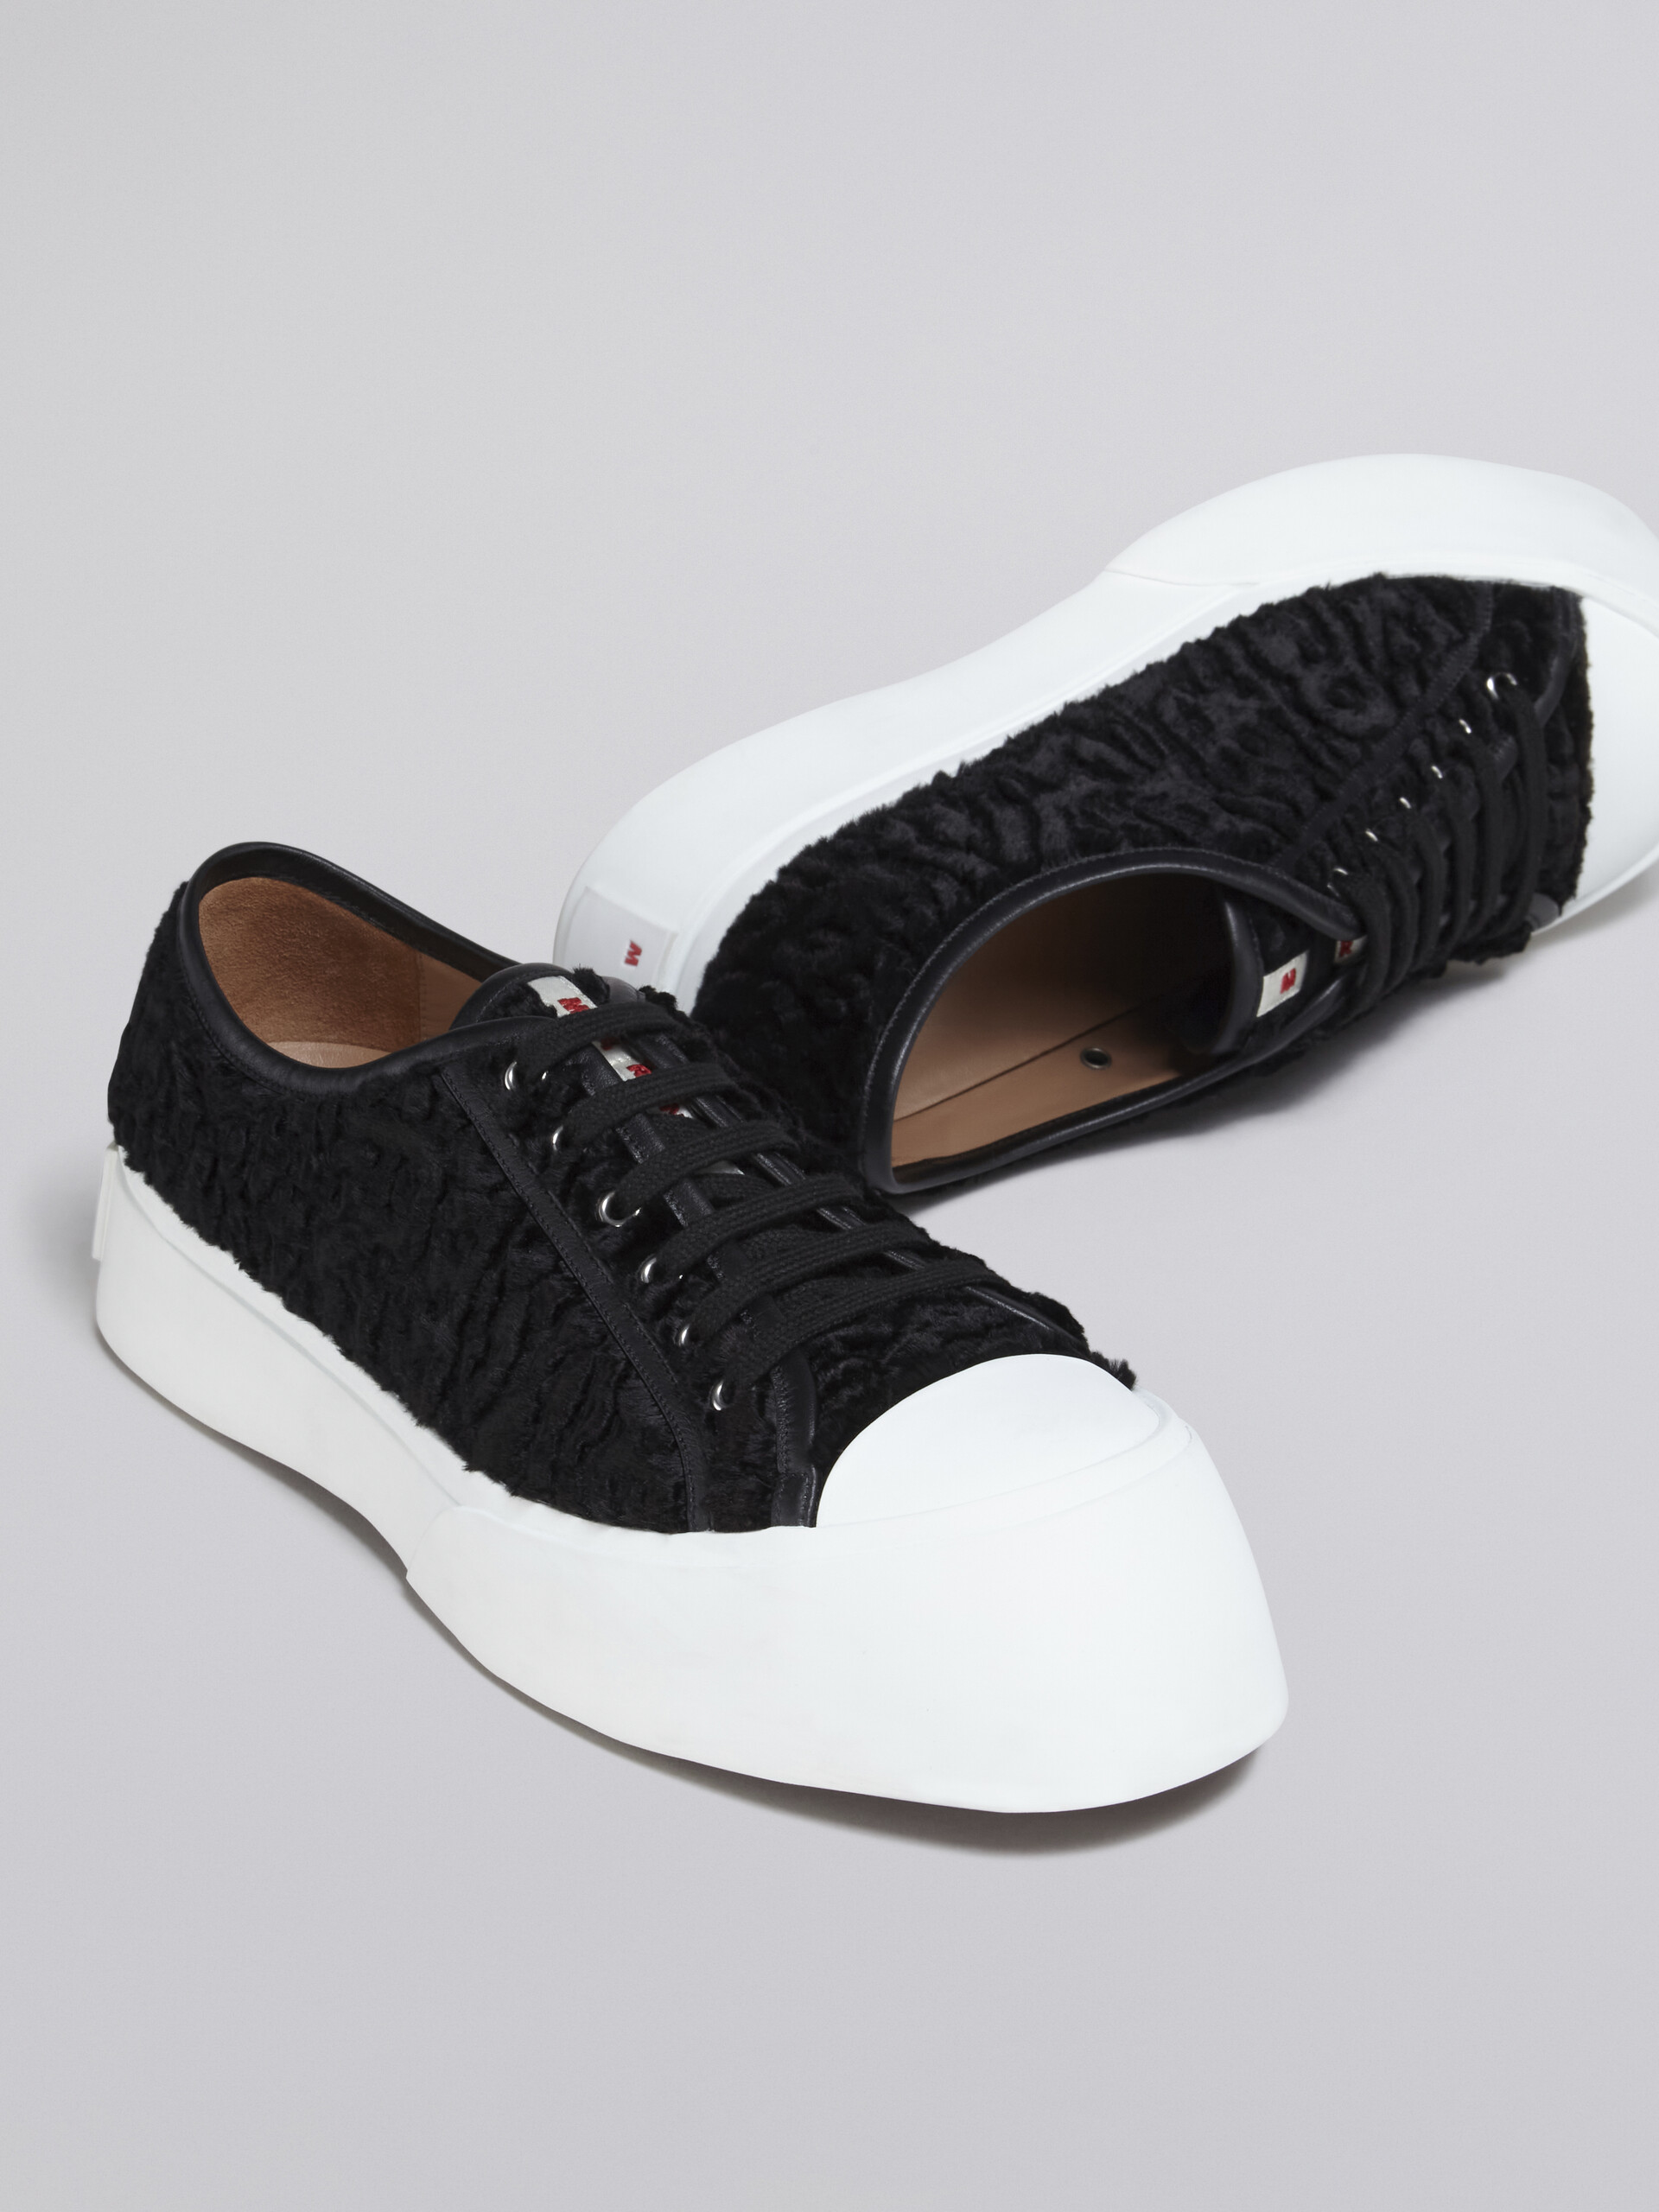 Black soft calf leather PABLO sneaker - Sneakers - Image 5